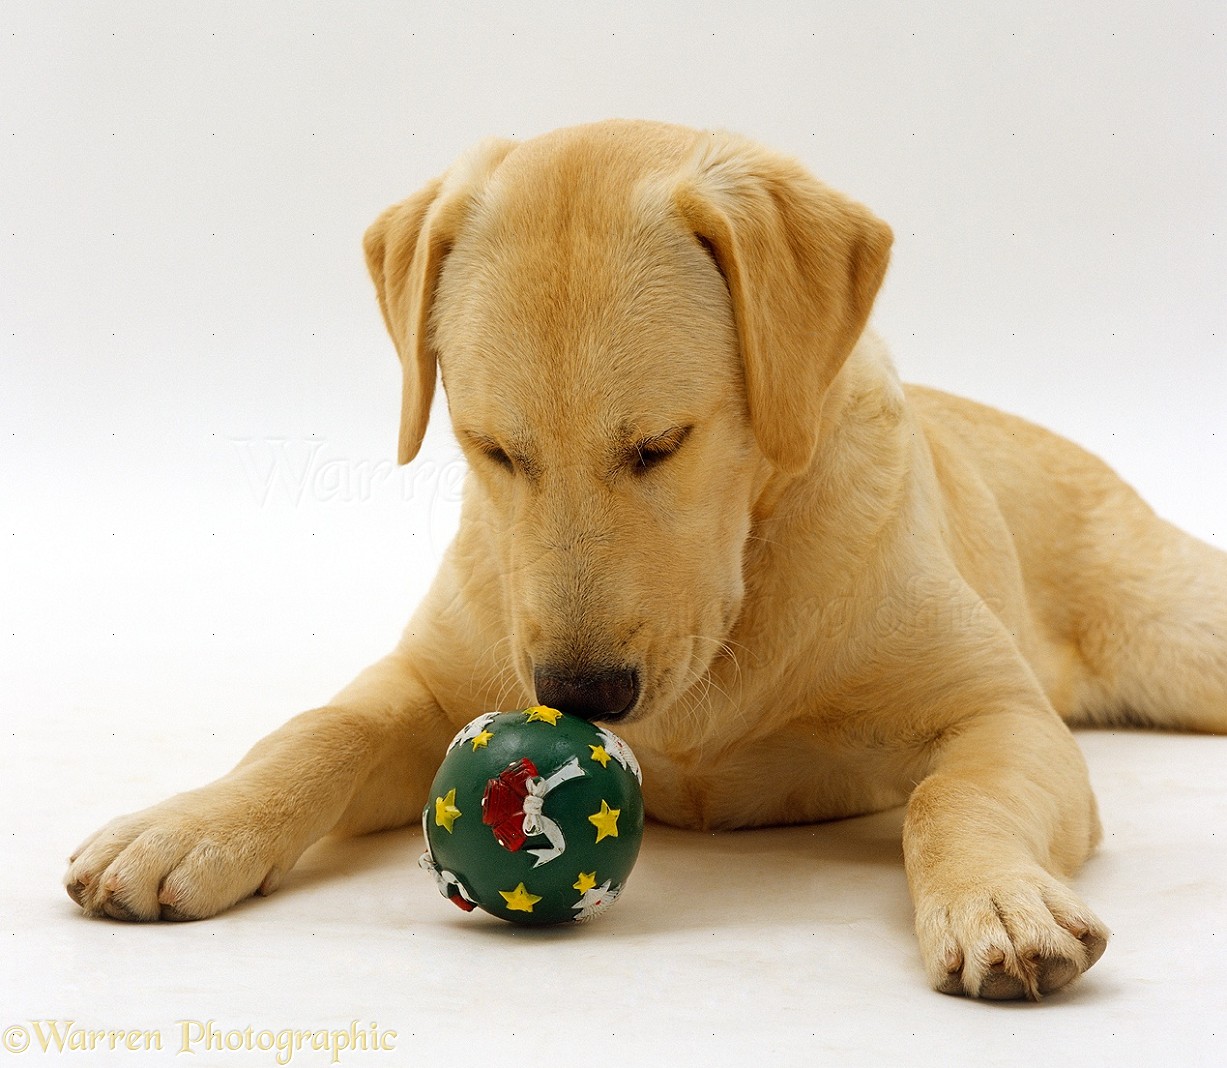 https://www.warrenphotographic.co.uk/photography/bigs/24359-Labrador-x-Golden-Retriever-sniffing-squeaky-Christmas-ball-white-background.jpg